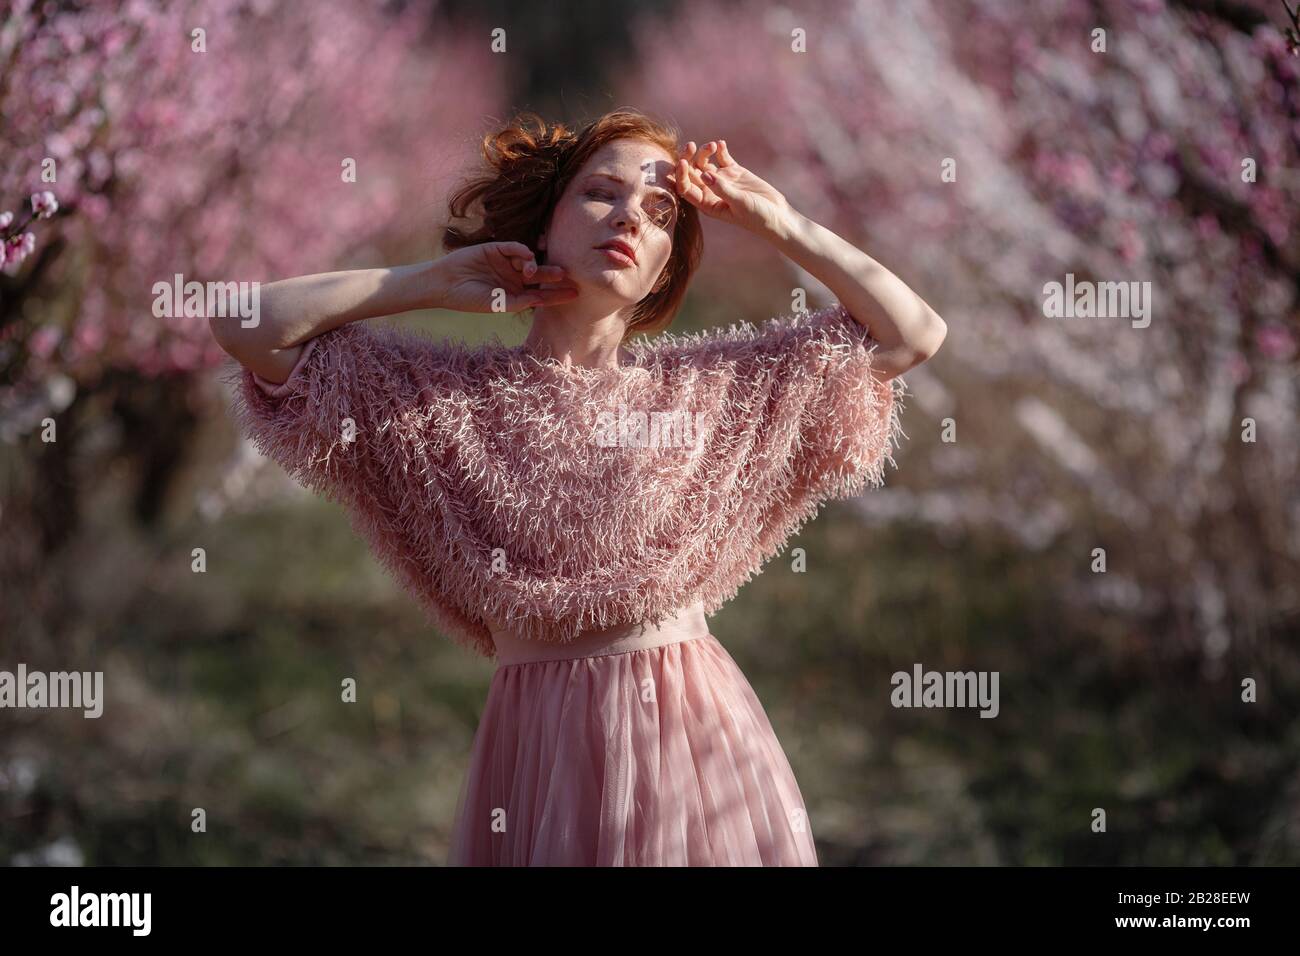 Beautiful young girl with red hair in a gentle peach garden, which blossomed. The concept and idea of skin and hair care. Stock Photo